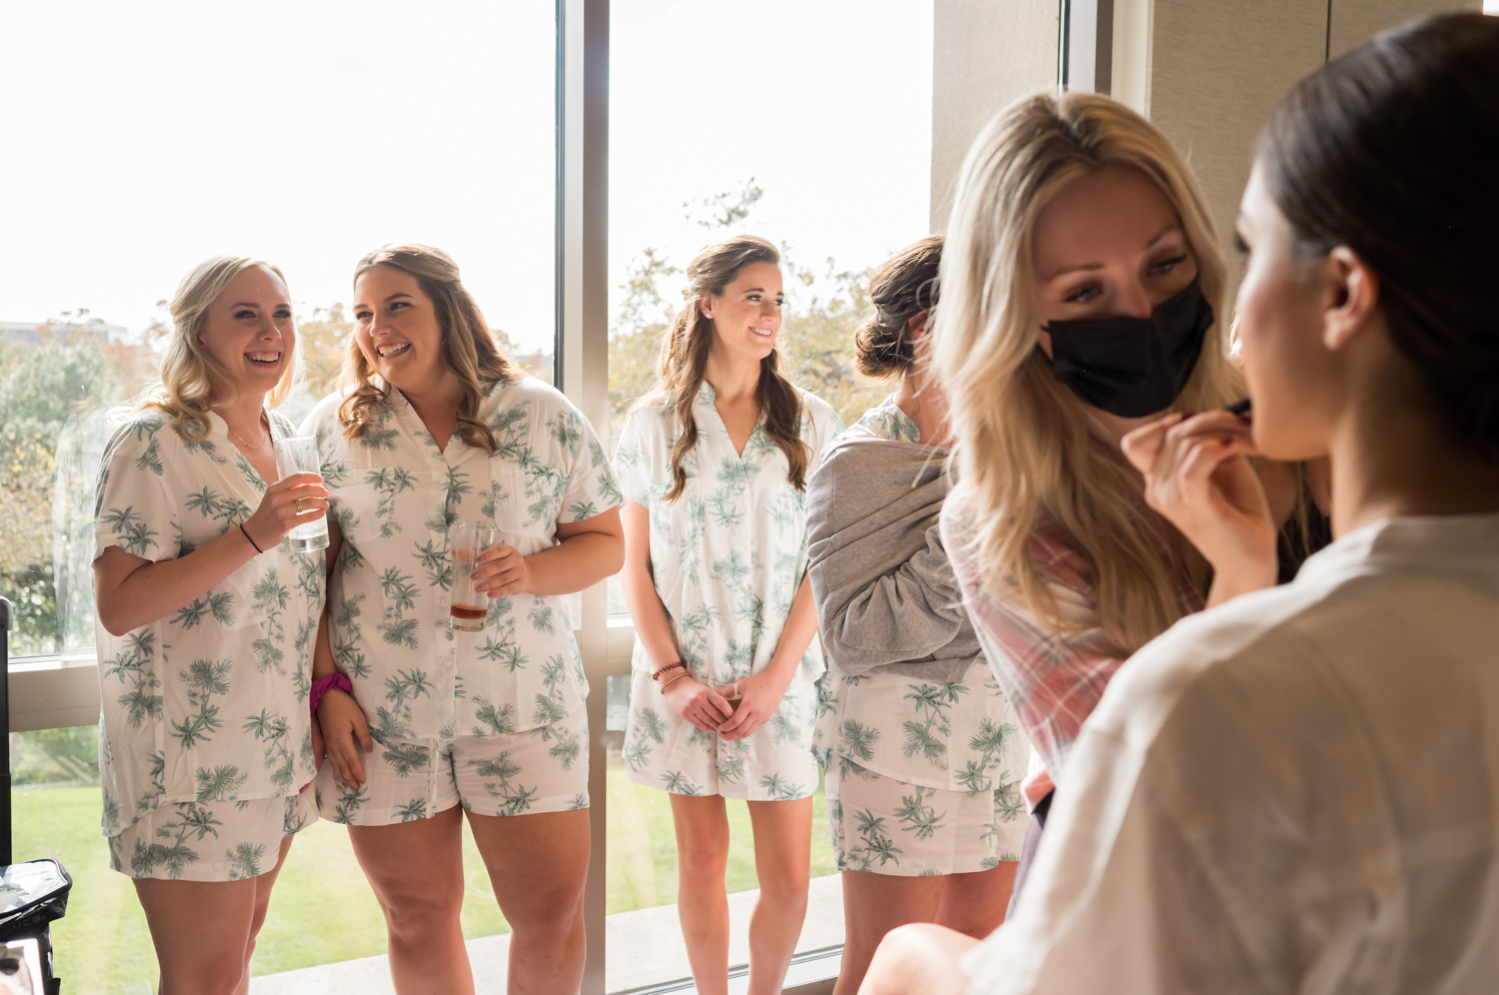 The bridesmaids smile as they watch the bride get her makeup done on the big day